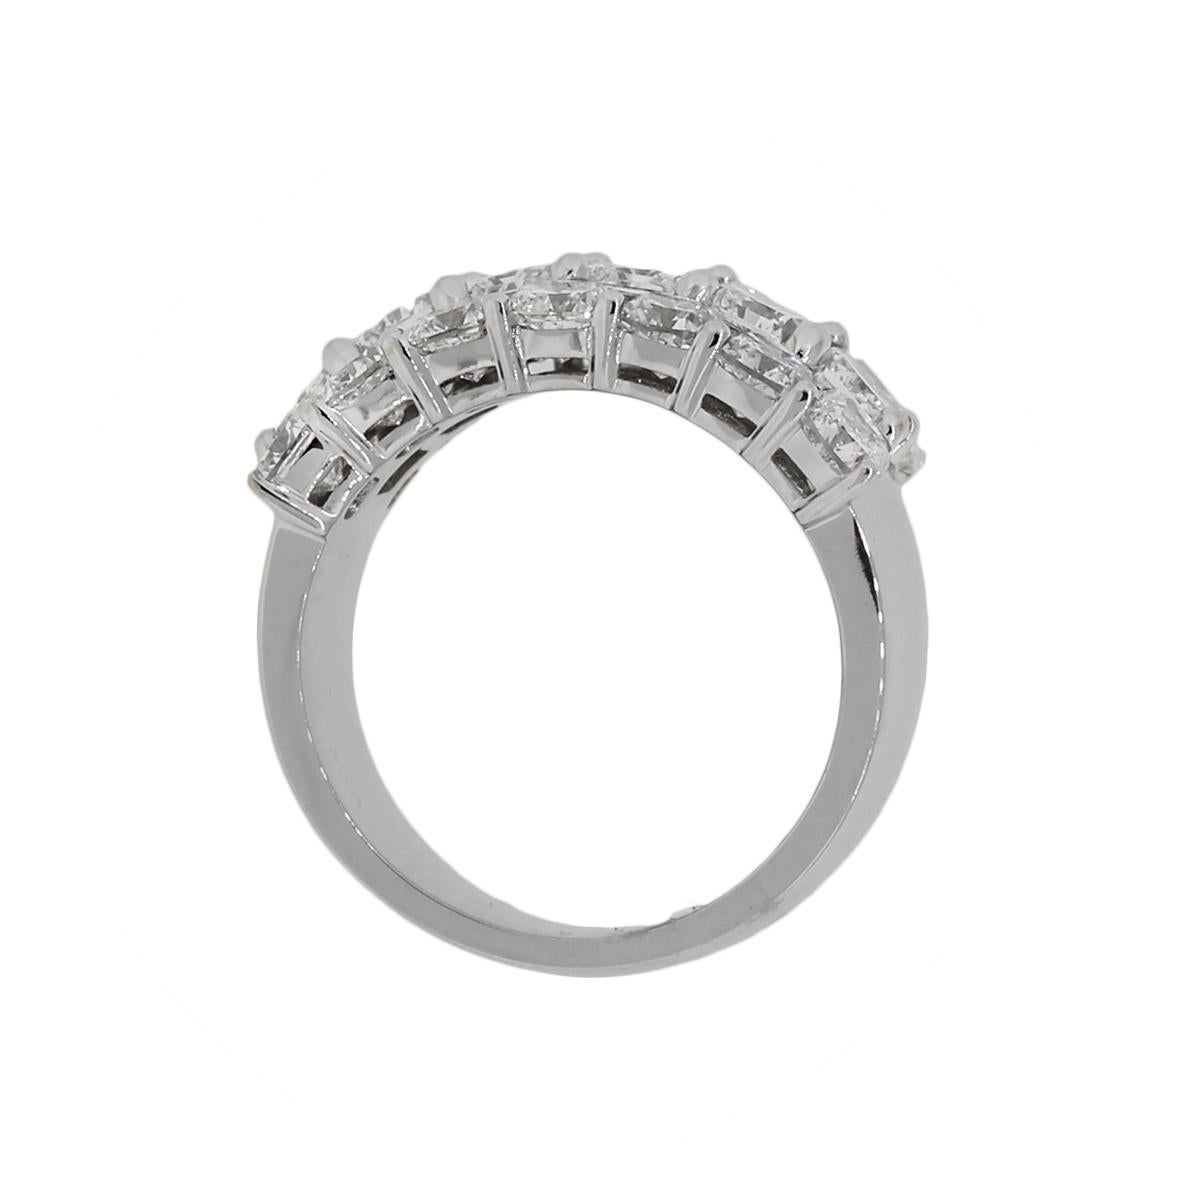 Material: 18k white gold
Diamond Details: Approximately 3.26ctw of cushion cut diamonds and approximately 2.60ctw of round brilliant diamonds. Diamonds are G/H in color and VS in clarity
Ring Size: 6.50
Ring Measurements: 0.90″ x 0.44″ x 0.83″
Total